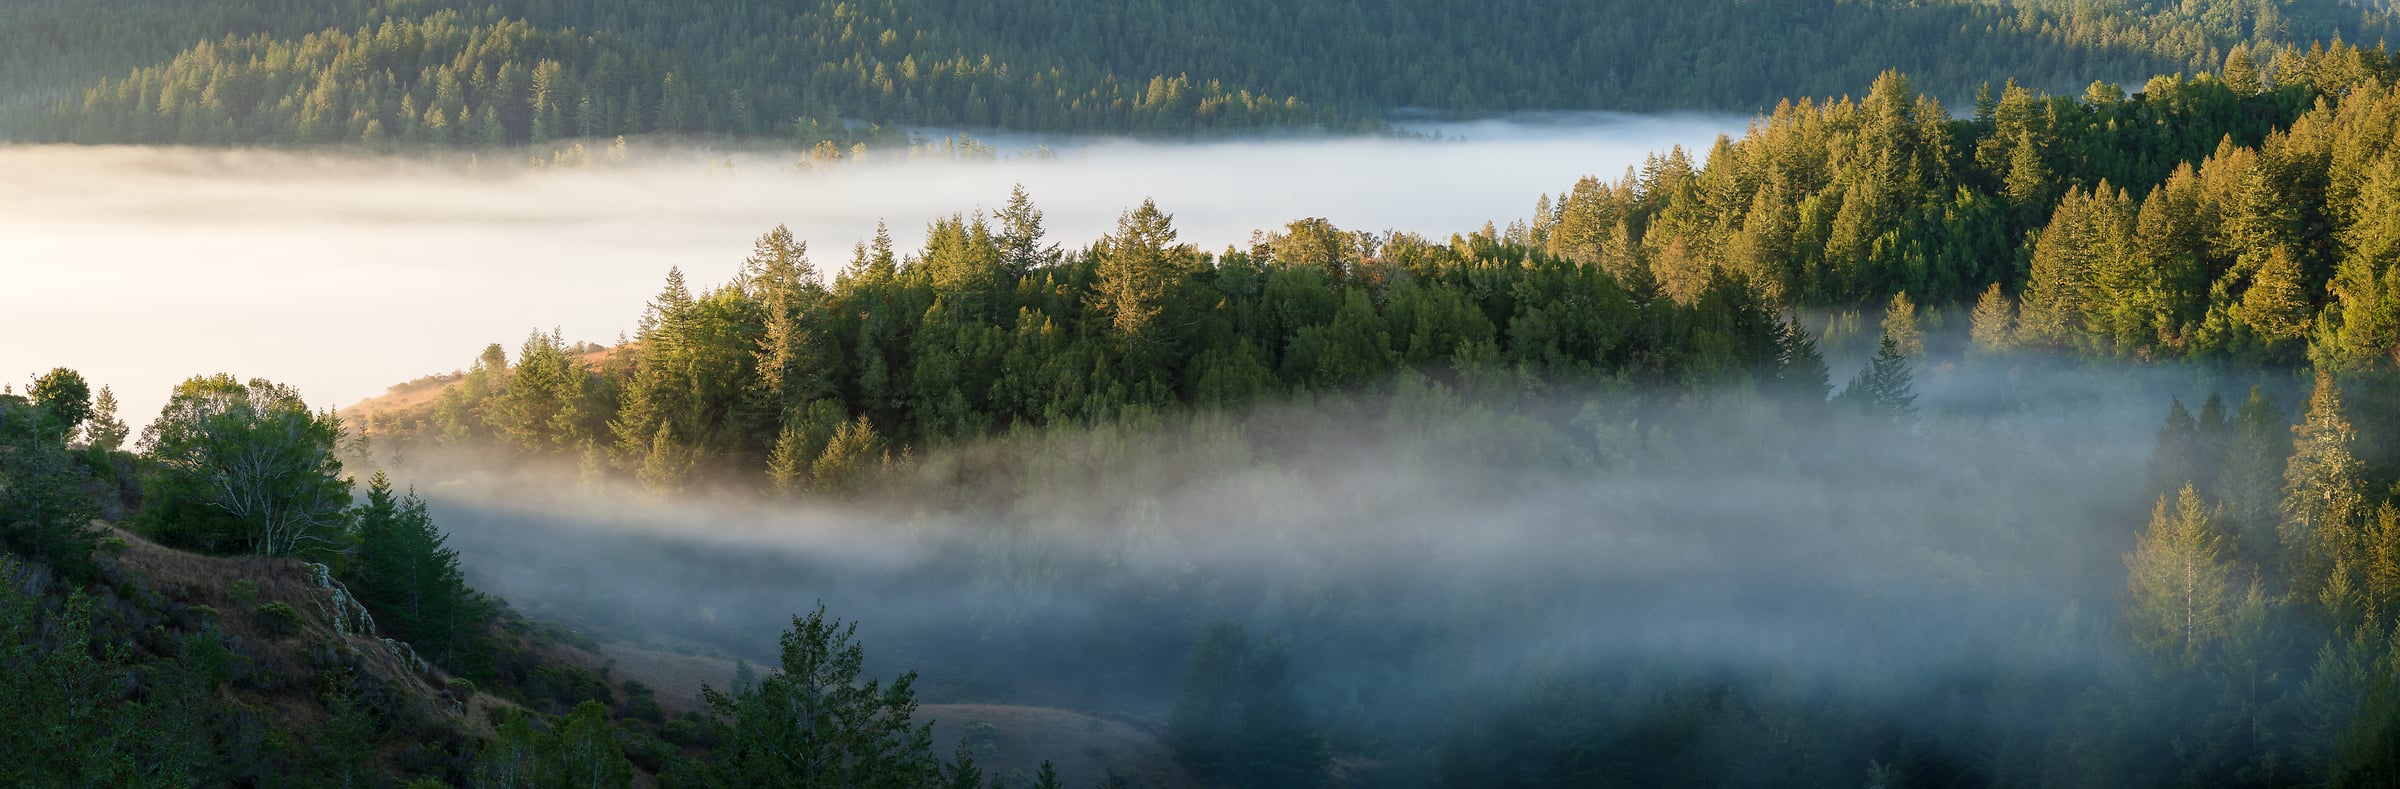 198 megapixels! A very high resolution, large-format VAST photo print of fog and a forest on hills; landscape photograph created by Jeff Lewis in Forest Knolls, California.